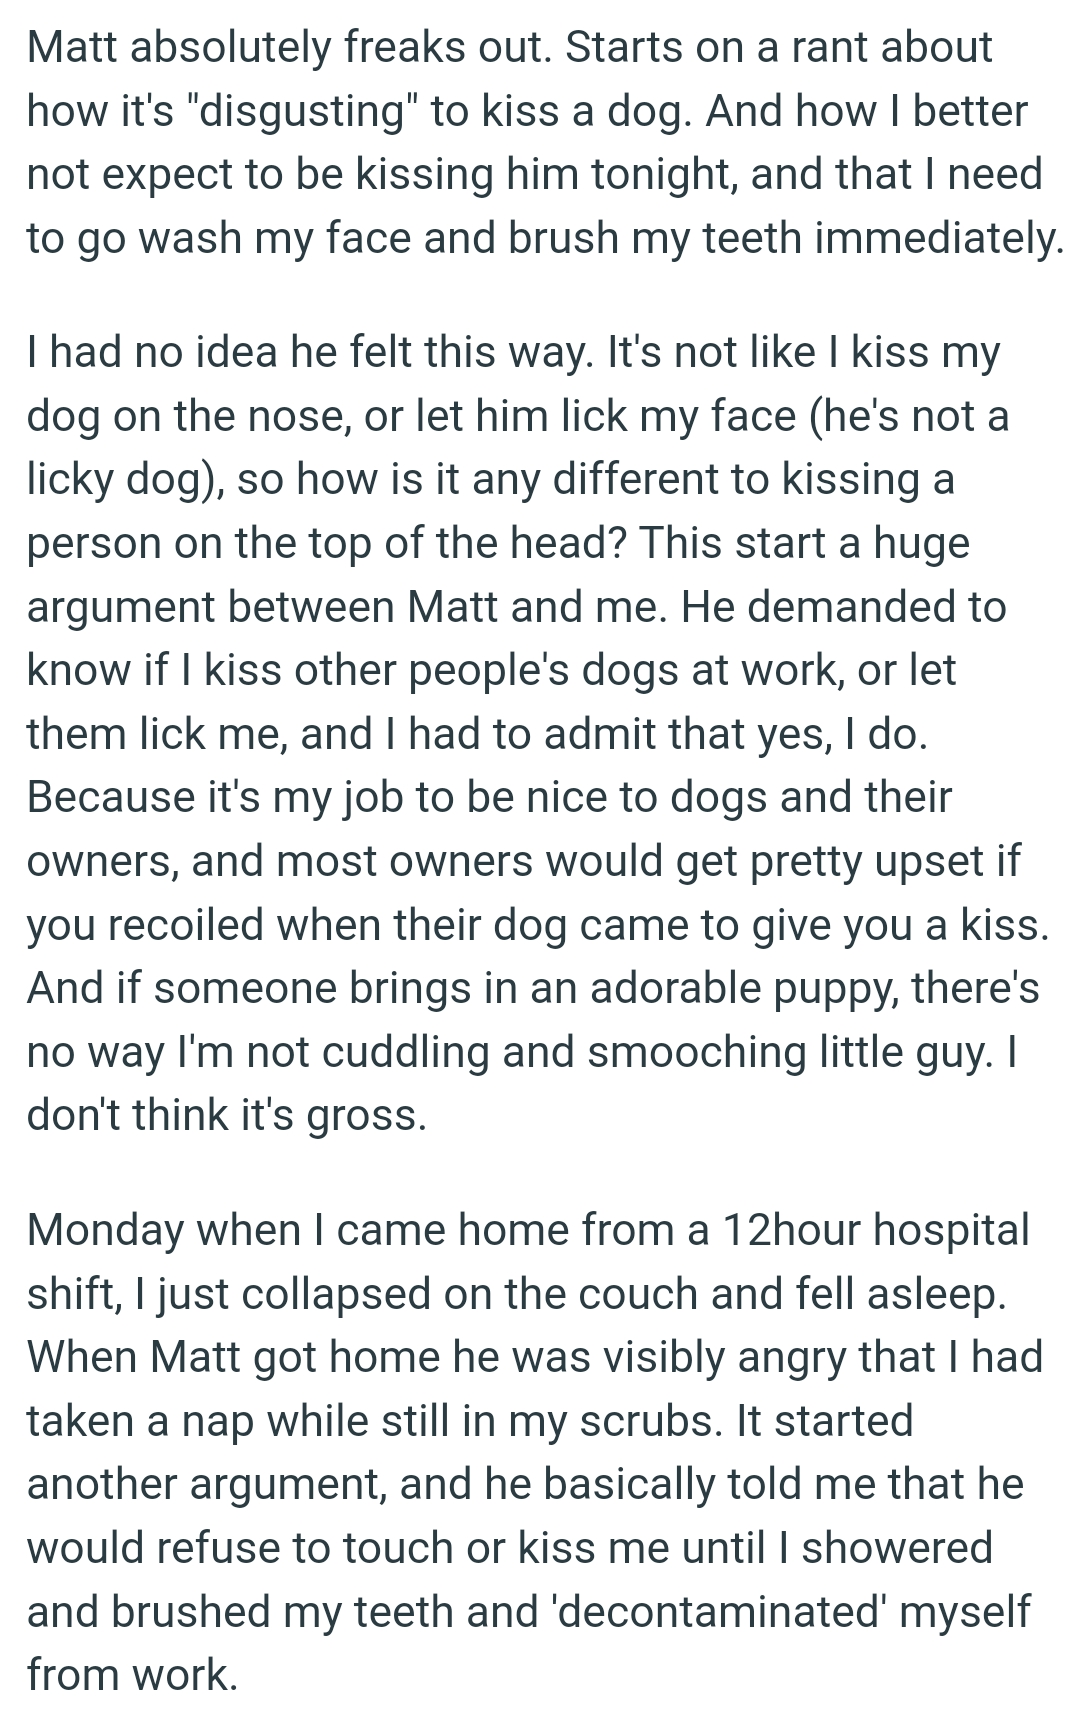 He demanded to know if the OP kisses other people's dogs at work